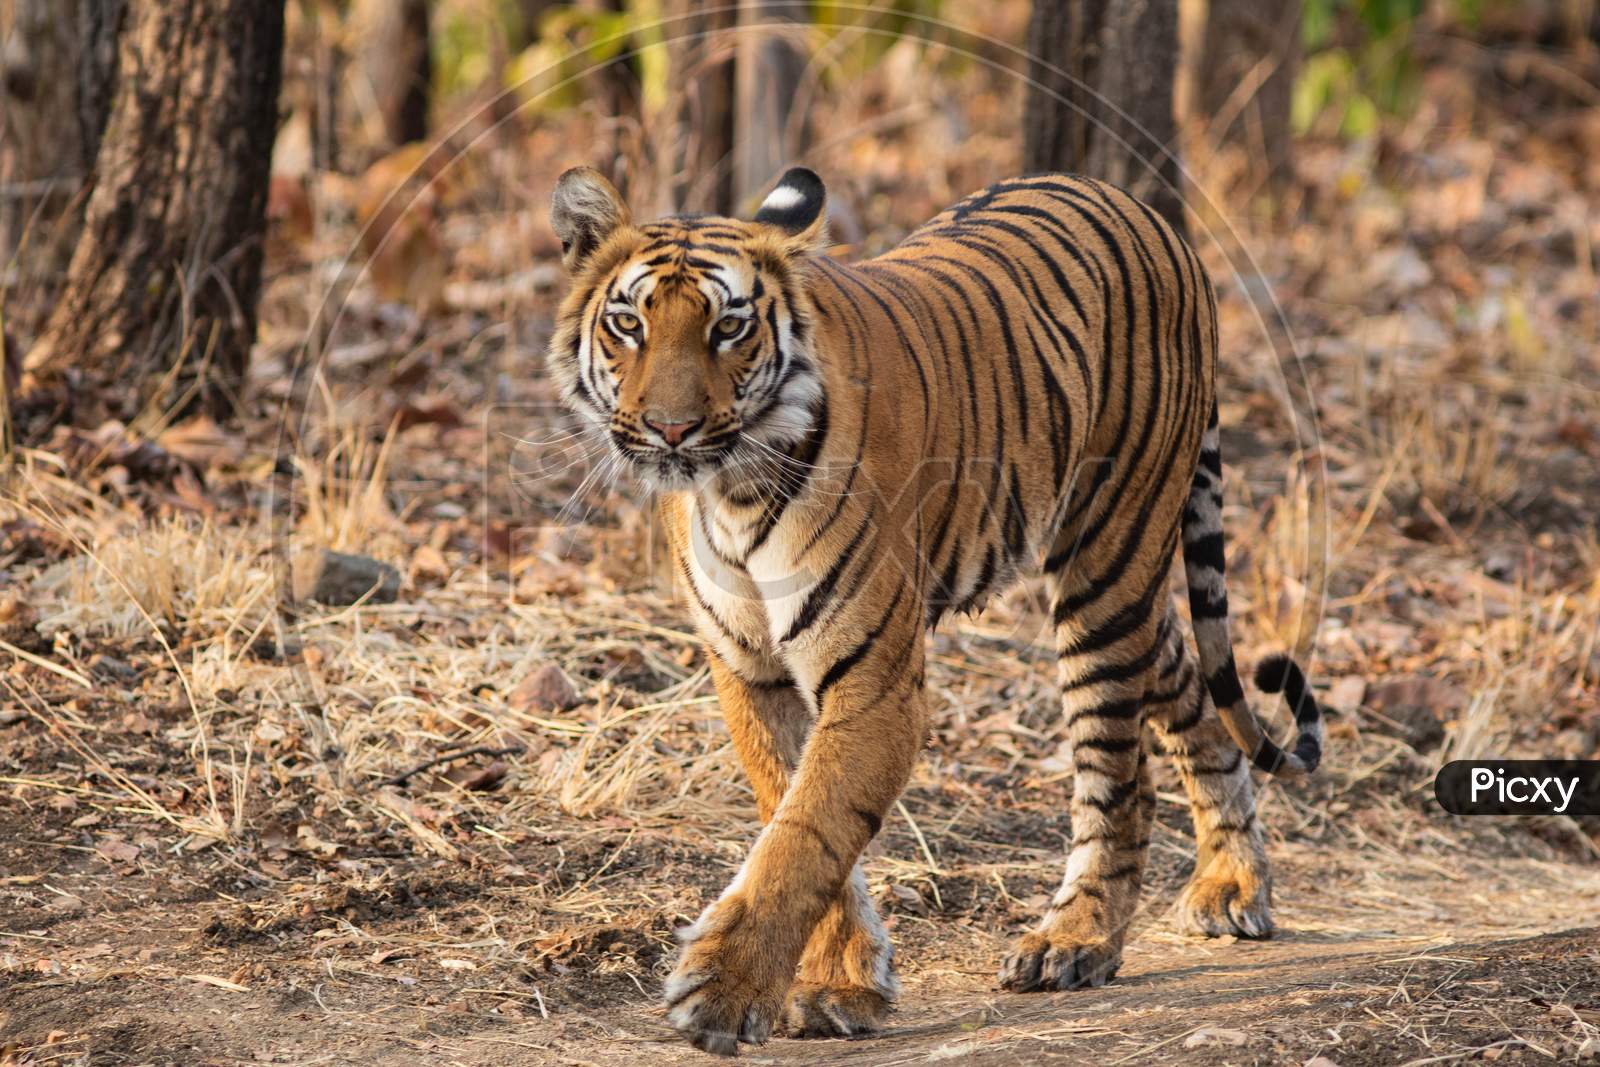 A Tiger Walking Head On Towards The Camera On A Road Having Bold Eyes